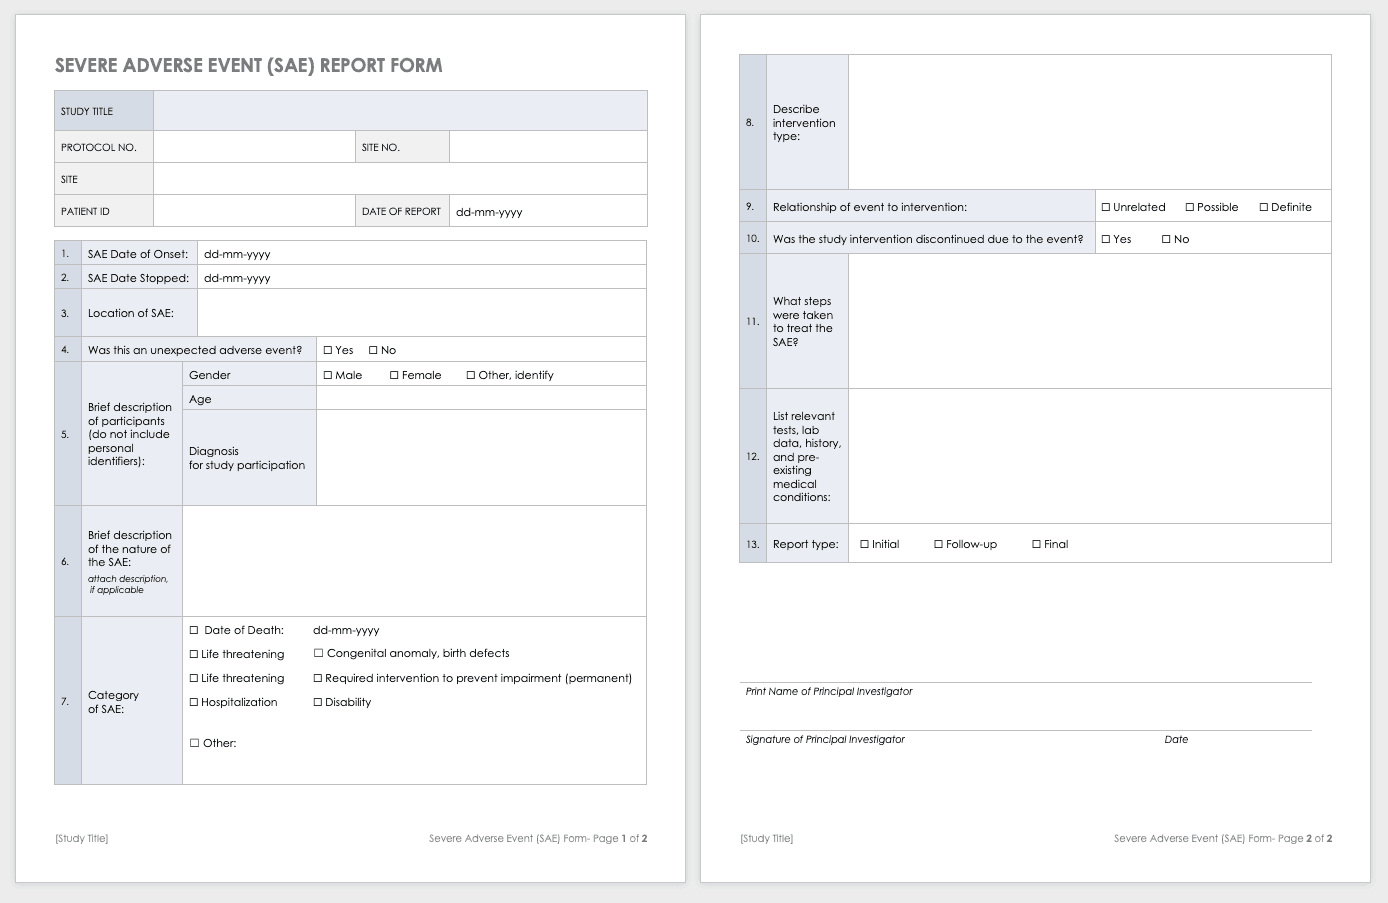 Free Clinical Trial Templates | Smartsheet For Clinical Trial Report Template